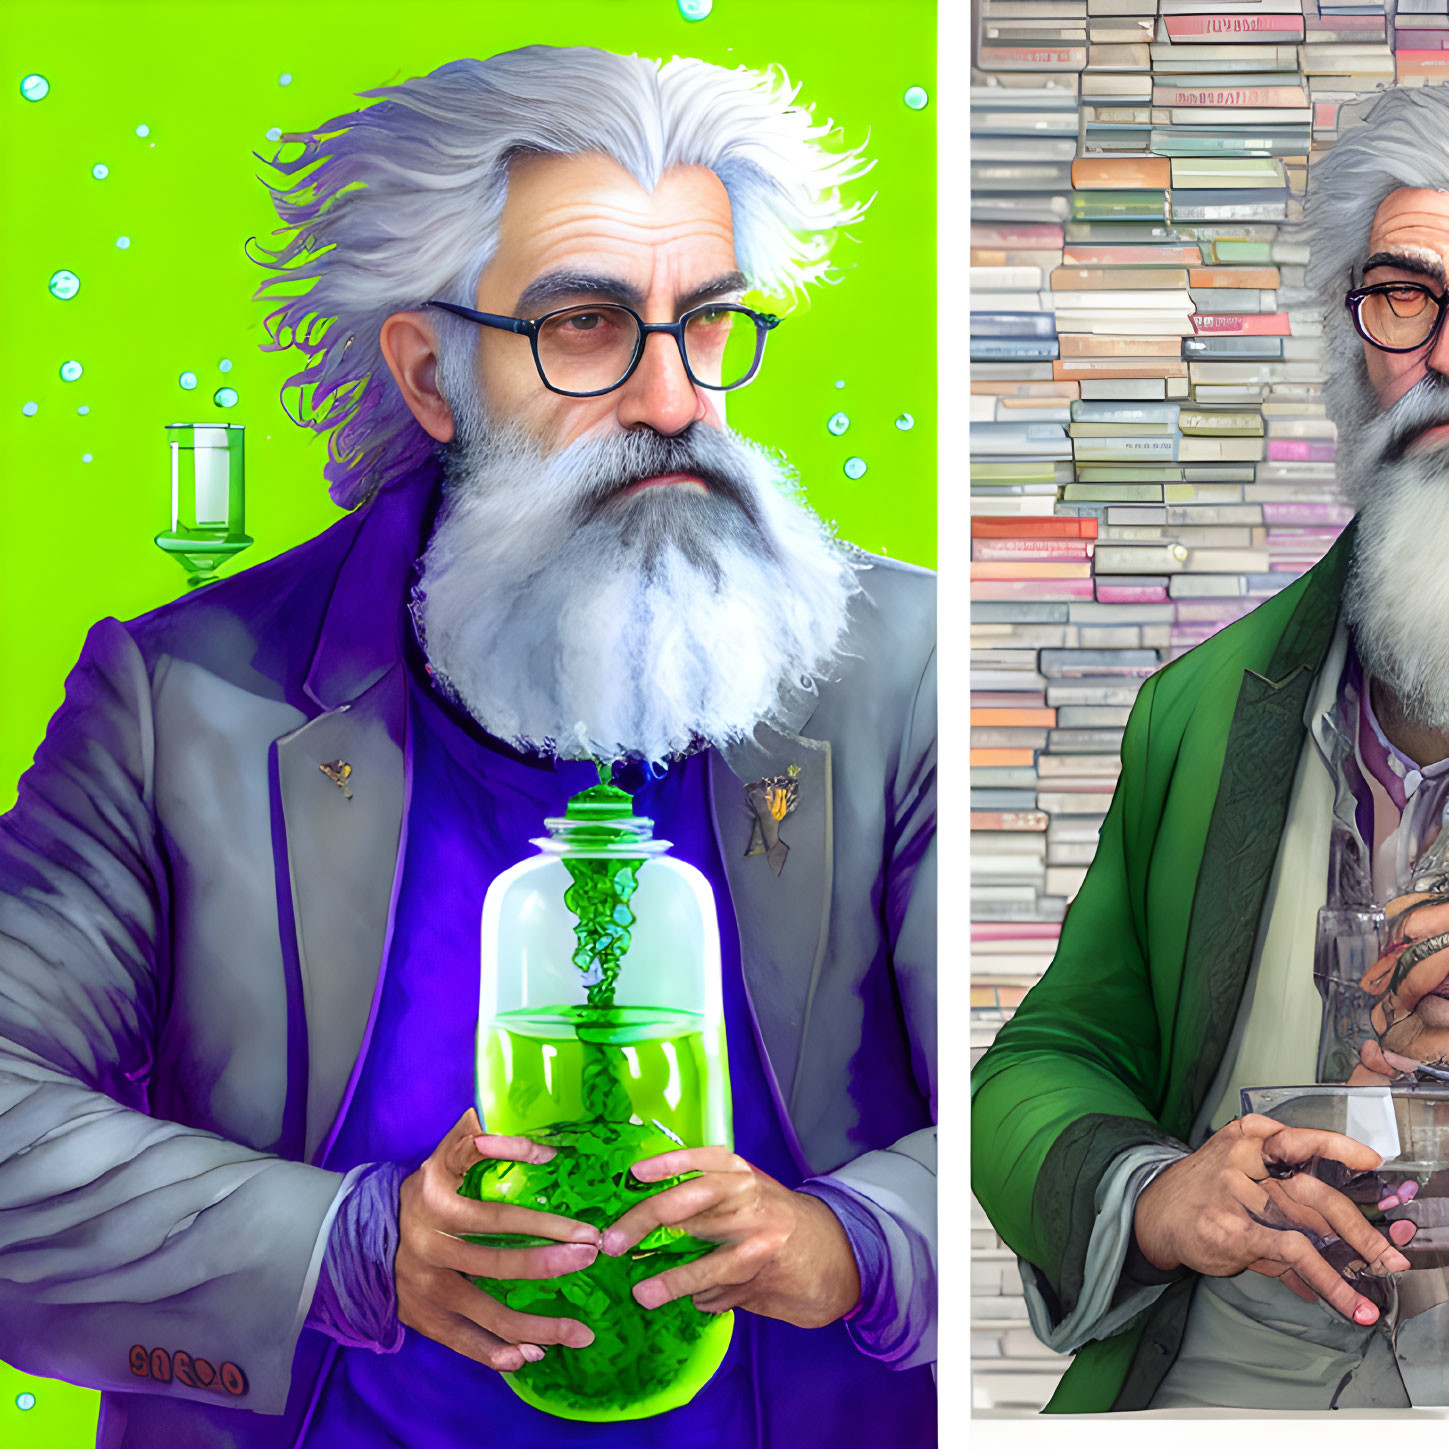 Illustration of gray-bearded man in purple jacket with bubbling potion, books, and bubbles.